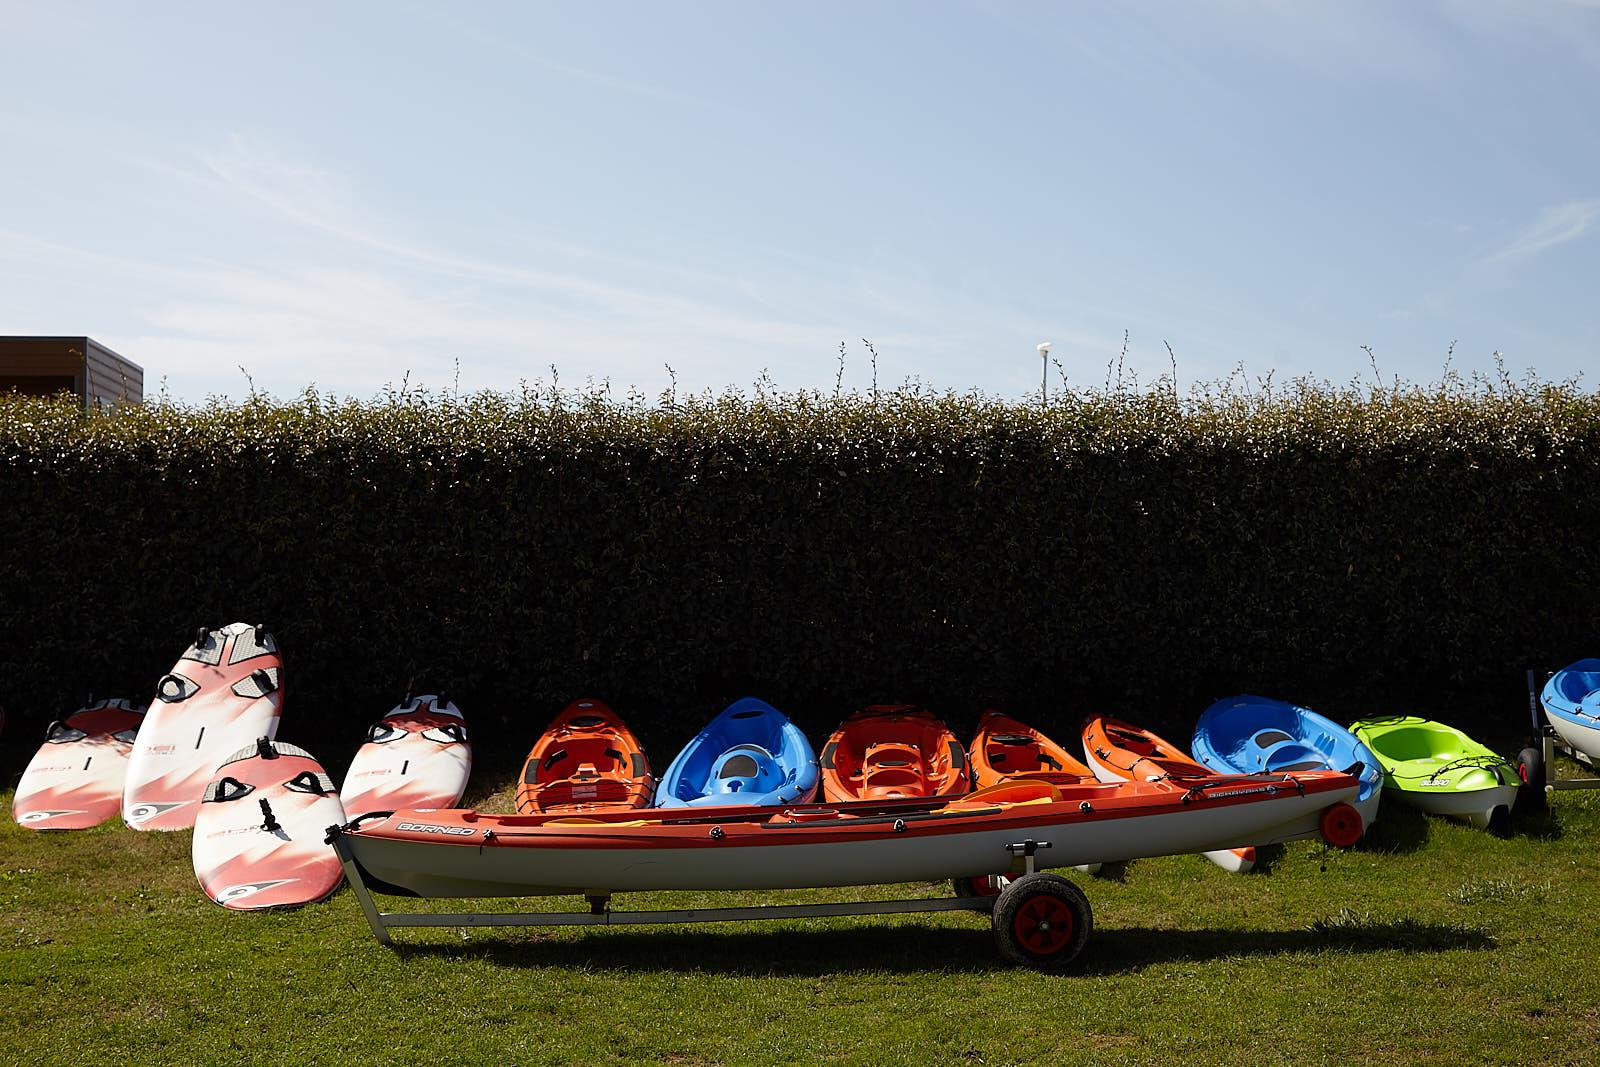 Club Nautique du Rohu - The kayaks and funboards